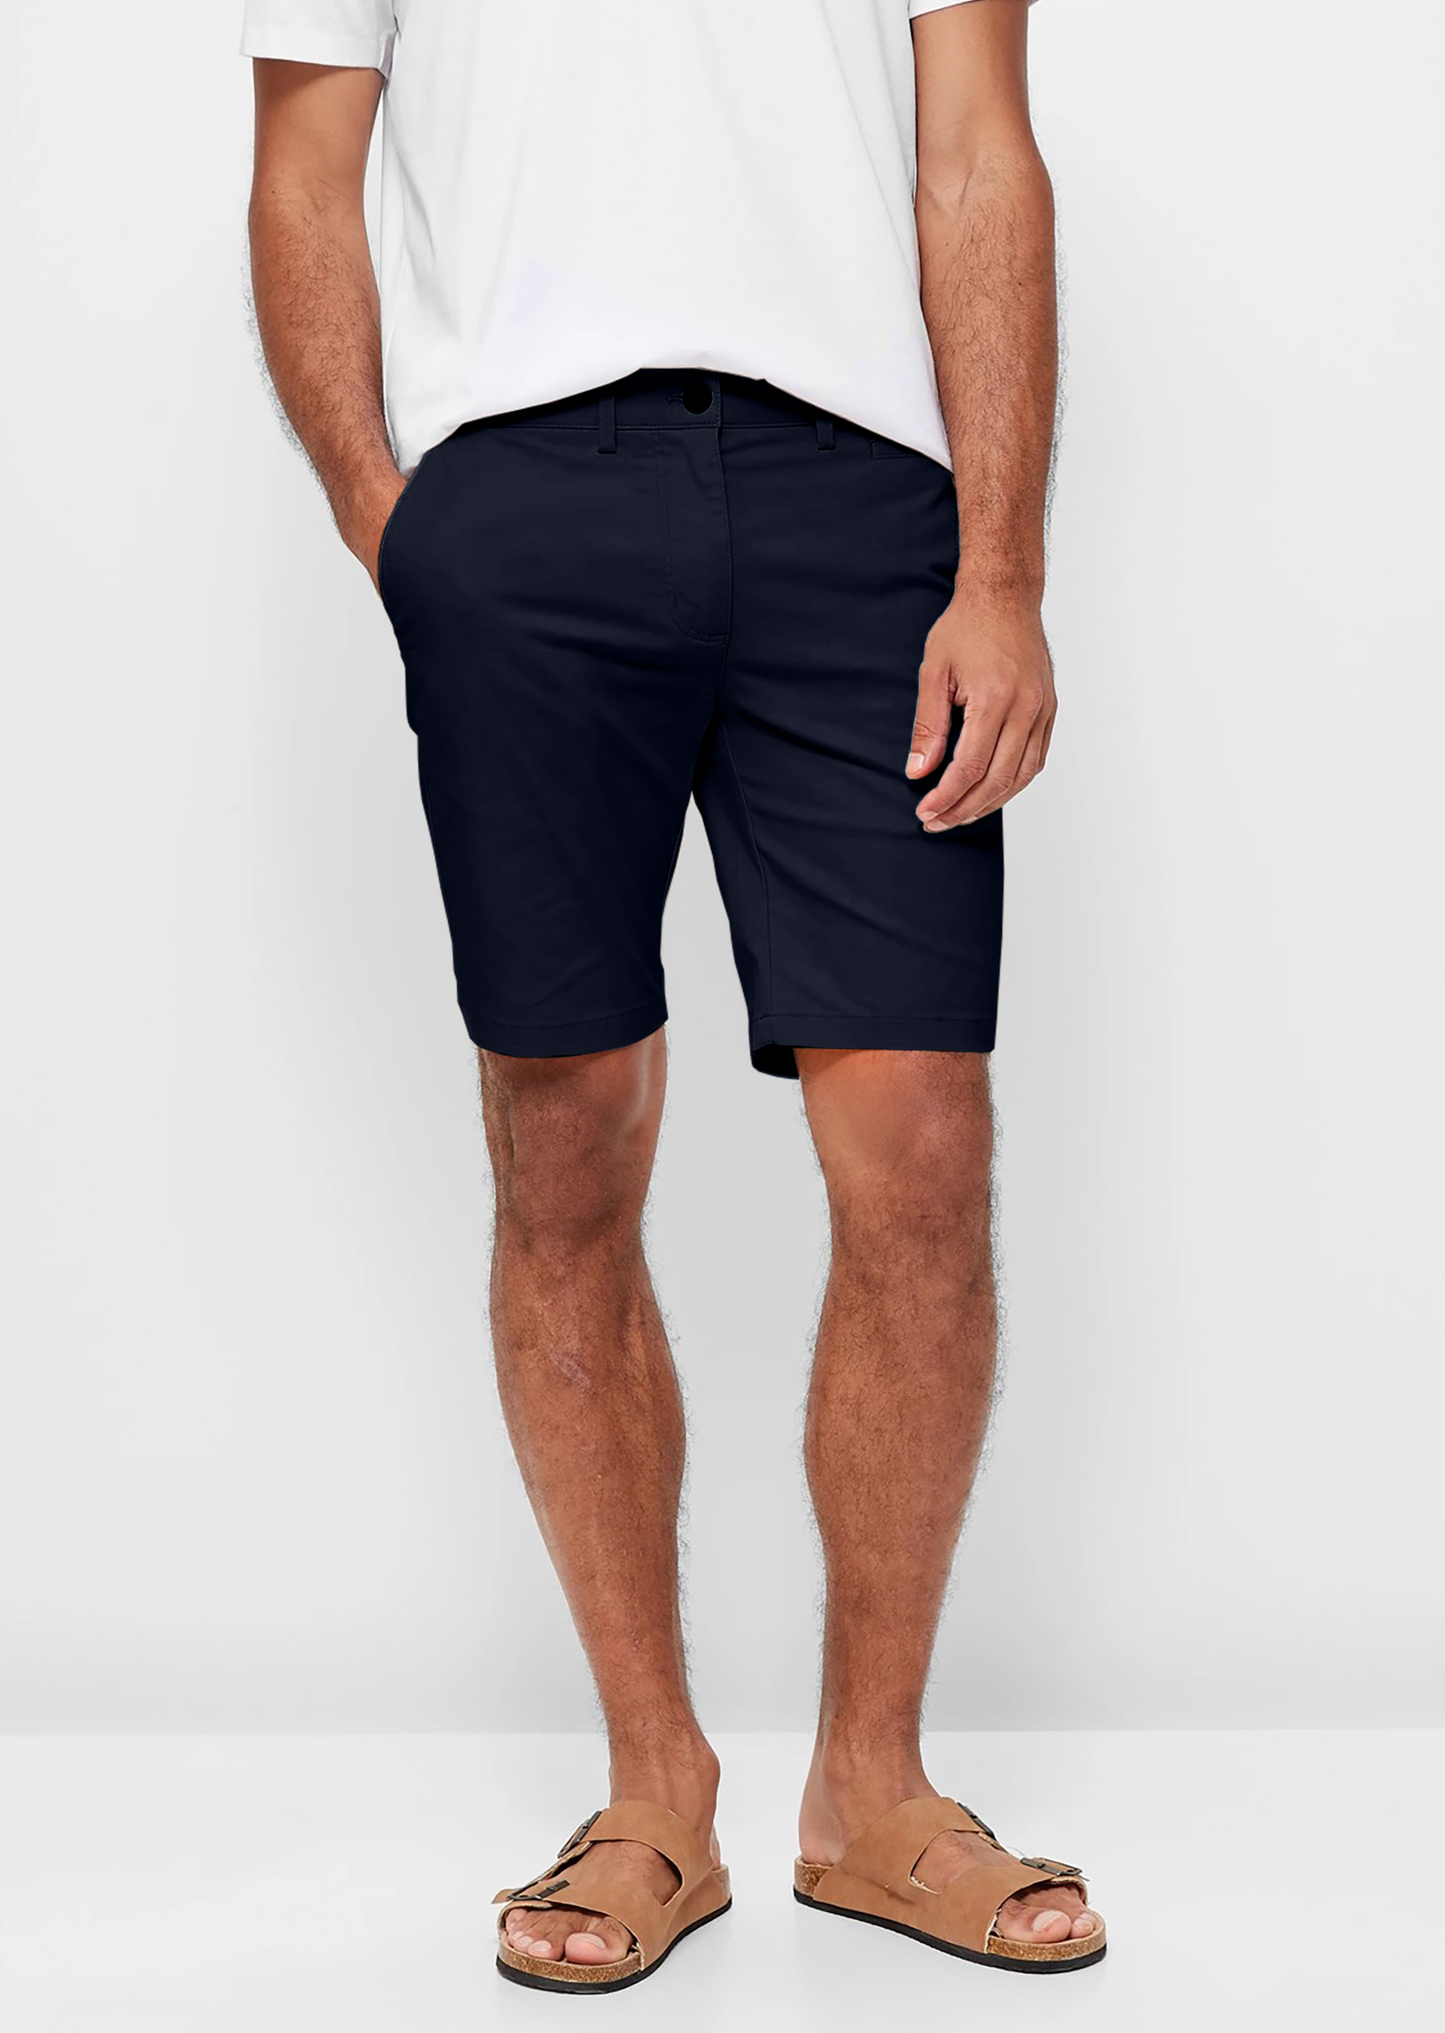 Mens Navy chinos shorts with front slanted pockets, jetted back pockets. zip fly fastening and brown horne buttons on the waistband and back pockets, the fit is a slim fit, this is worn with a white tee and white t-shirt